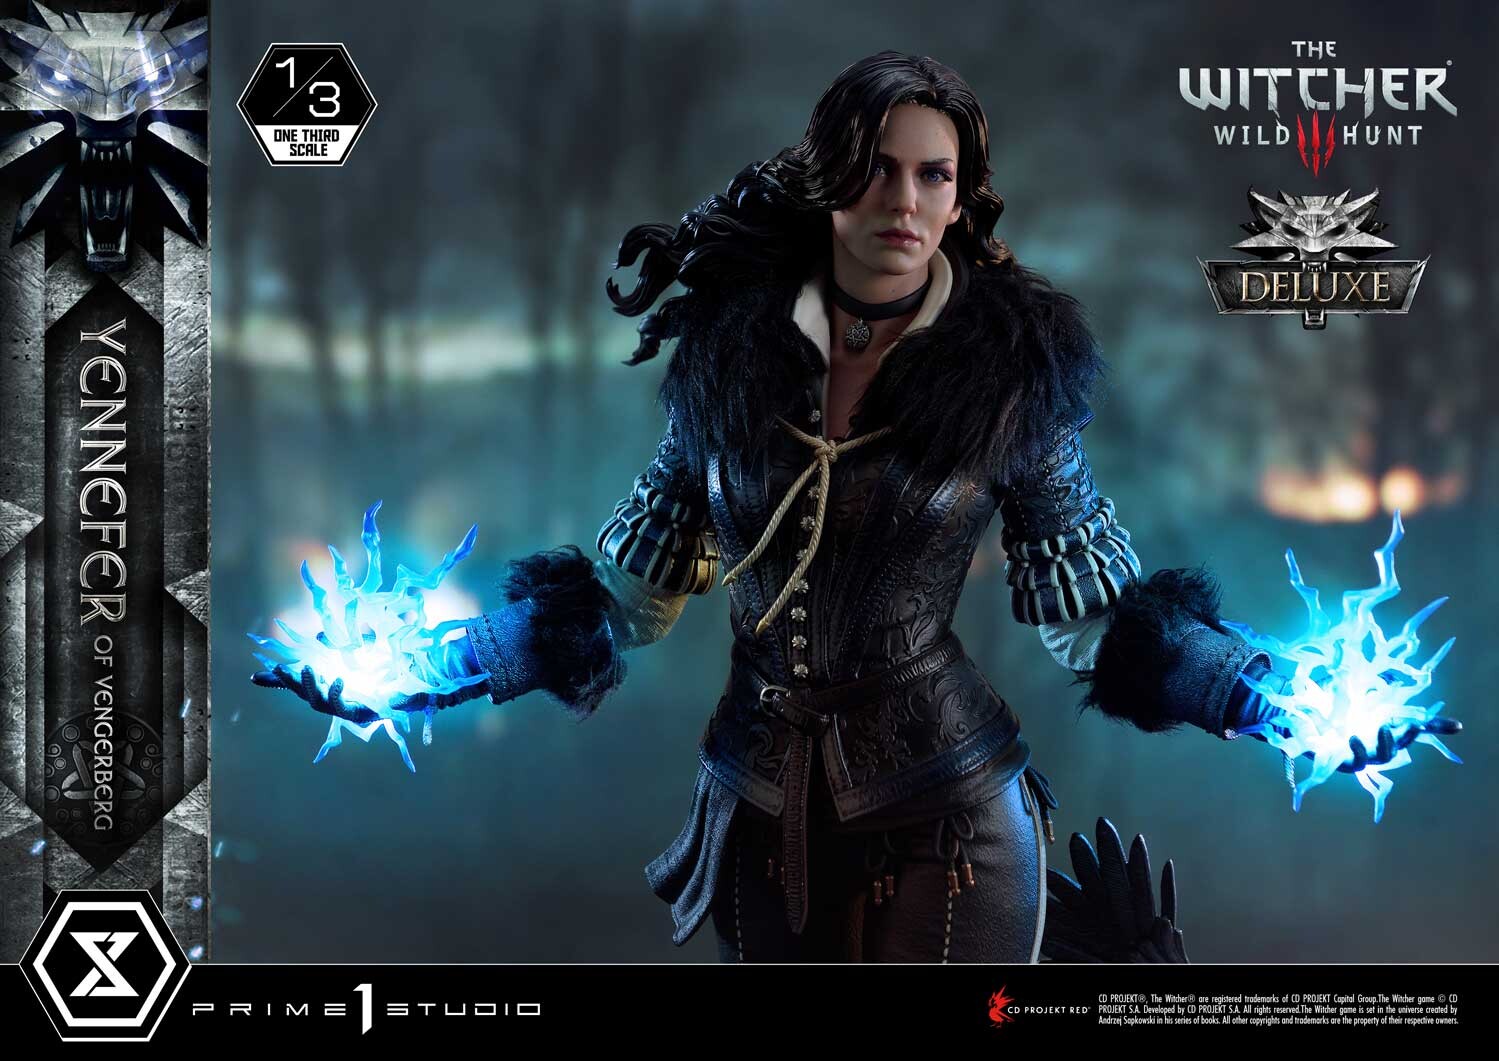 Yennefer of vengerberg the witcher 3 voiced standalone follower фото 29